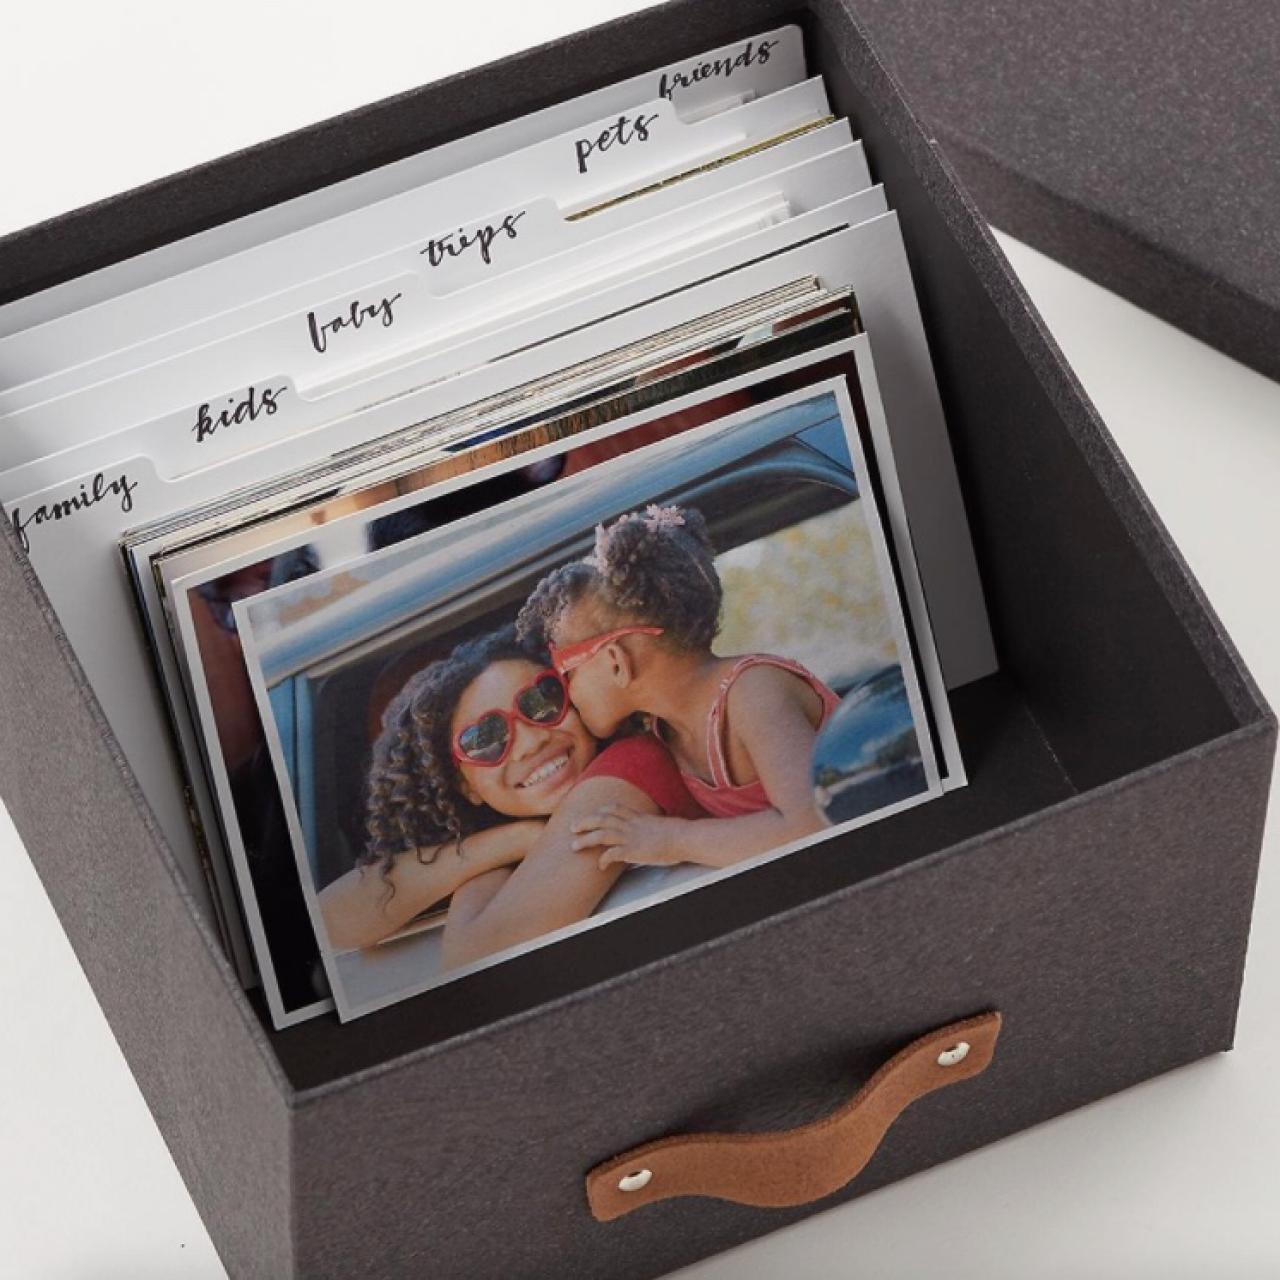 The right box for storing printed photos is designed for storing photos